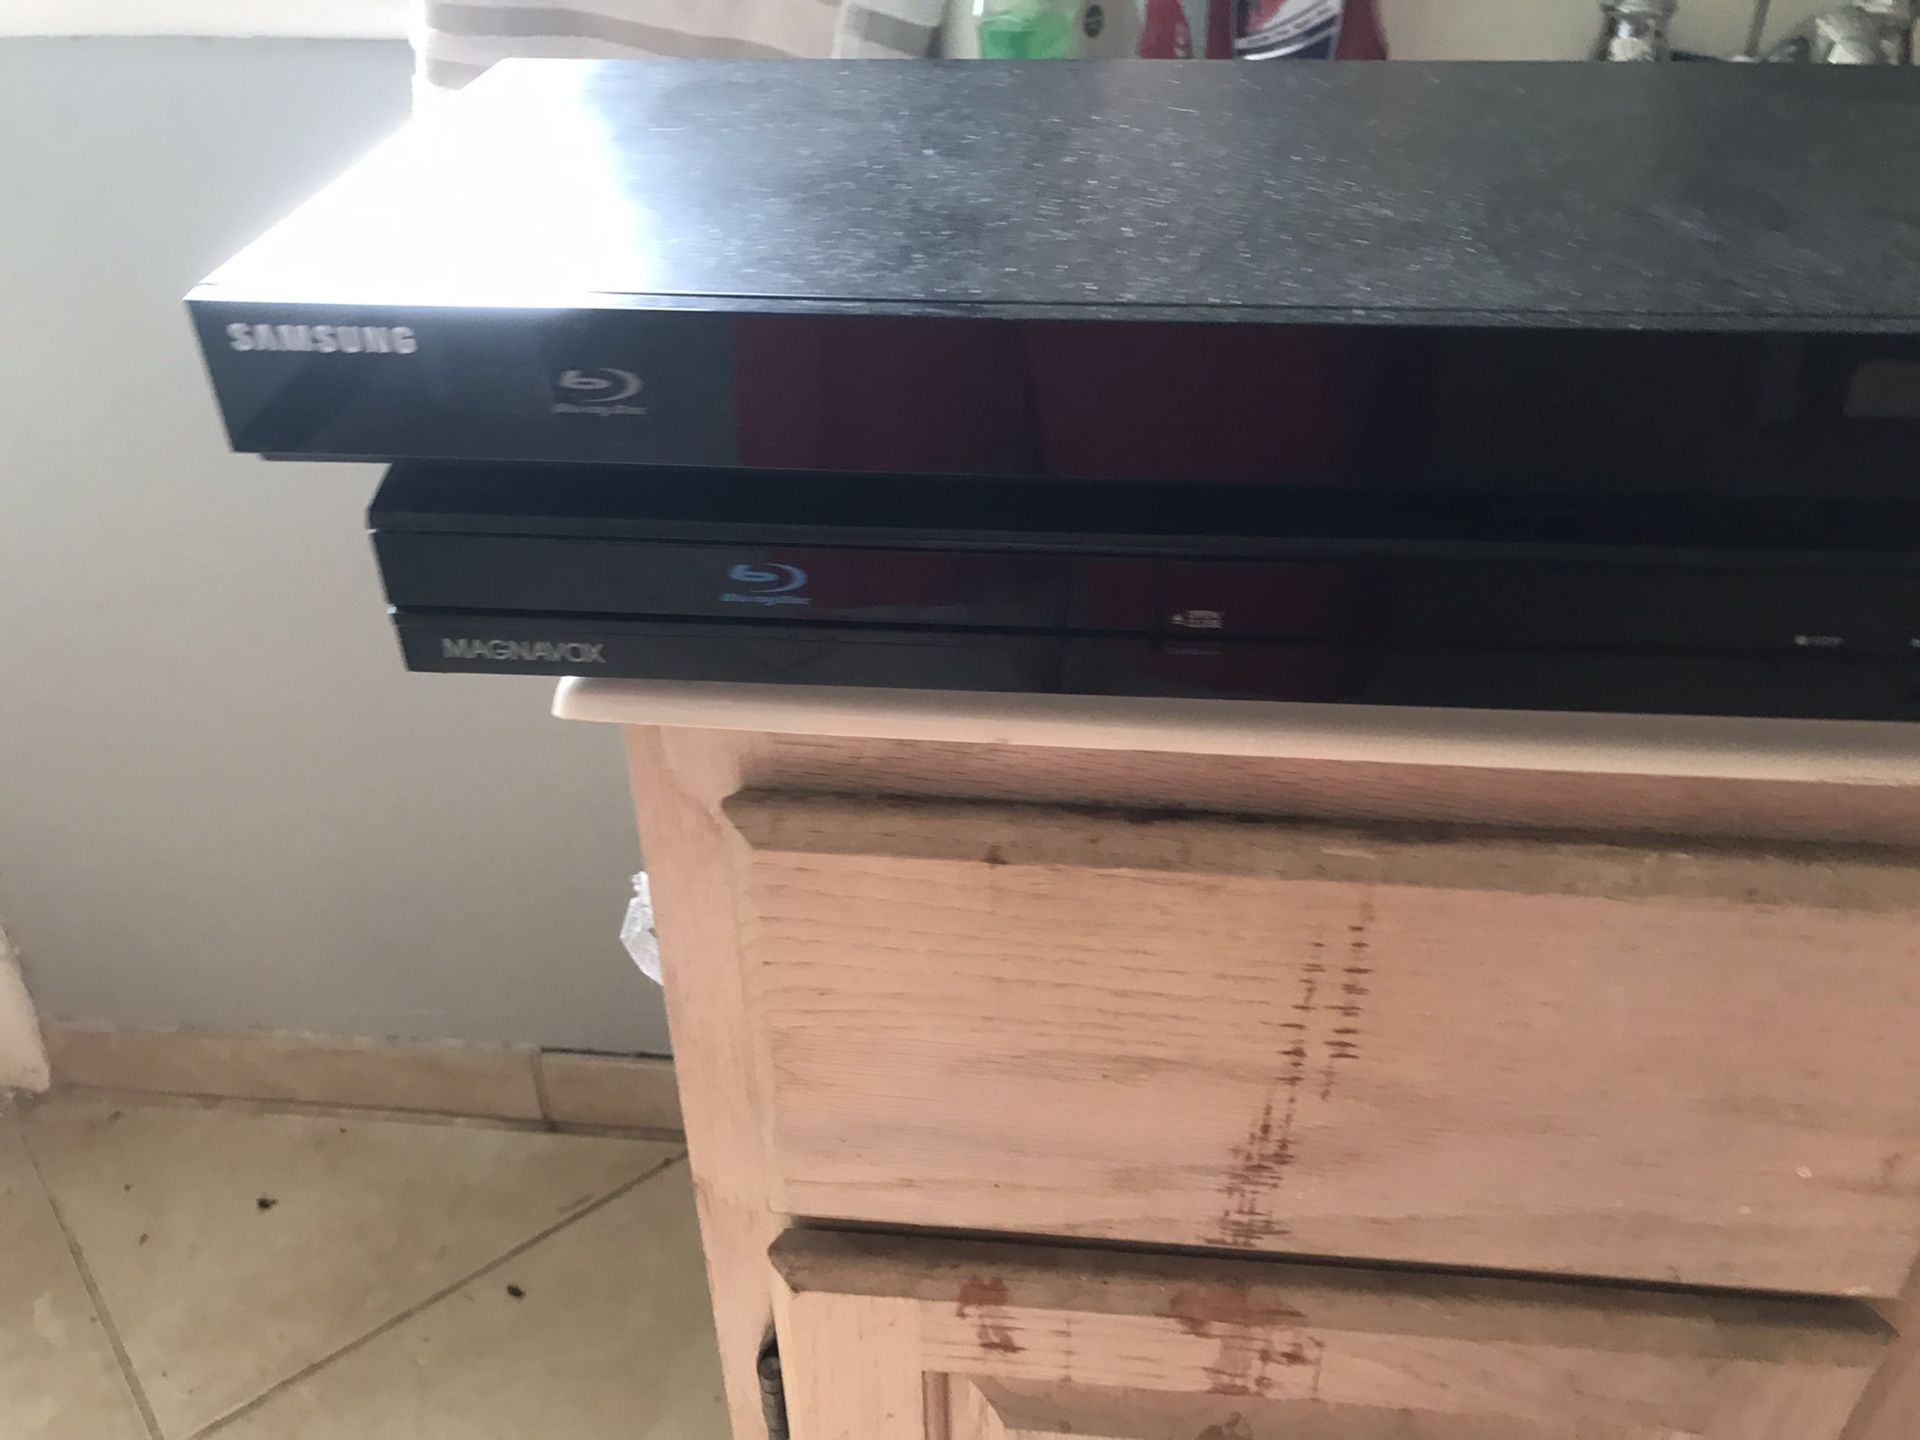 Two Blu-ray DVD players works great when does Samsung the other one is a Magnavox